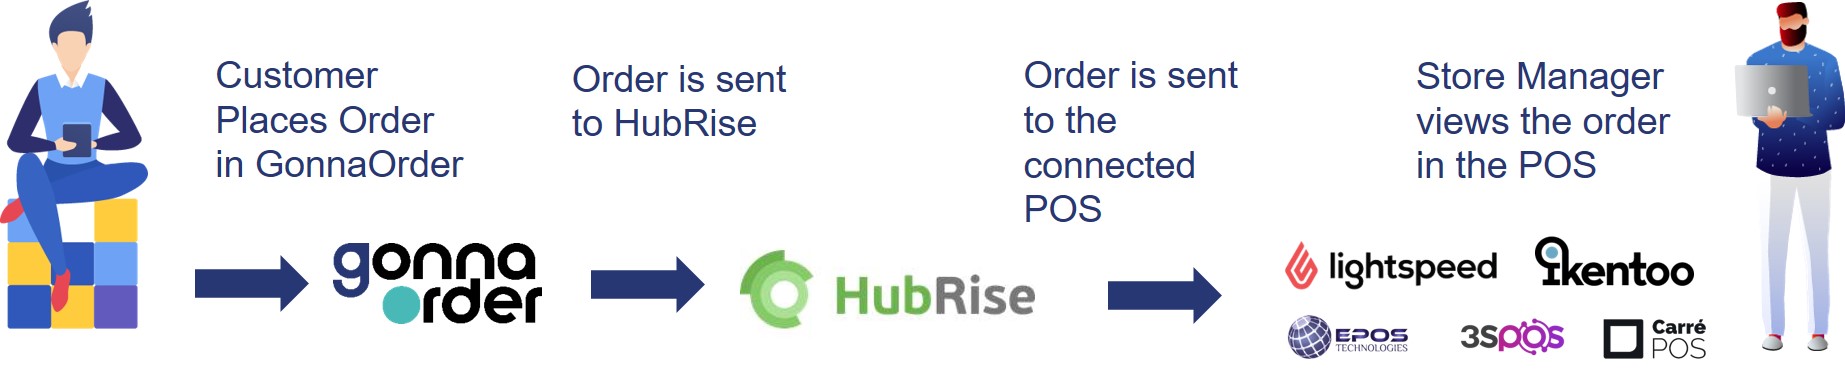 An illustration of the order process with HubRise